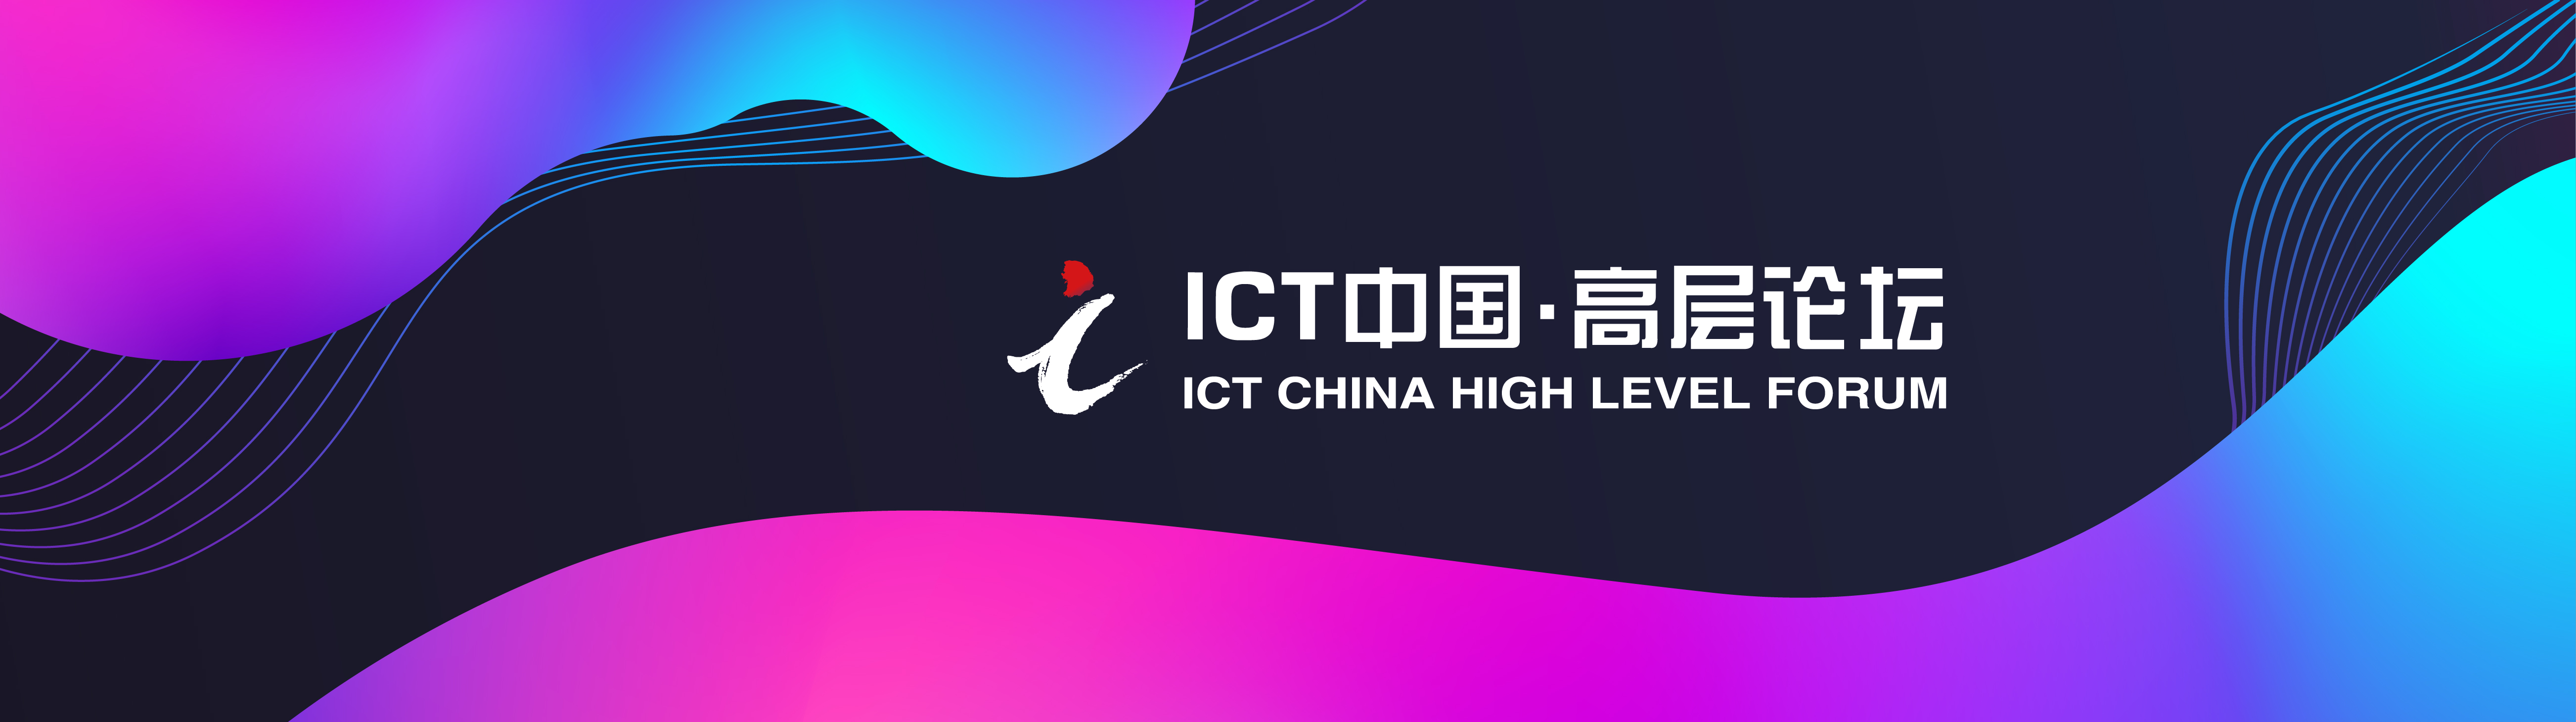 Conference ICT China High Level Forum